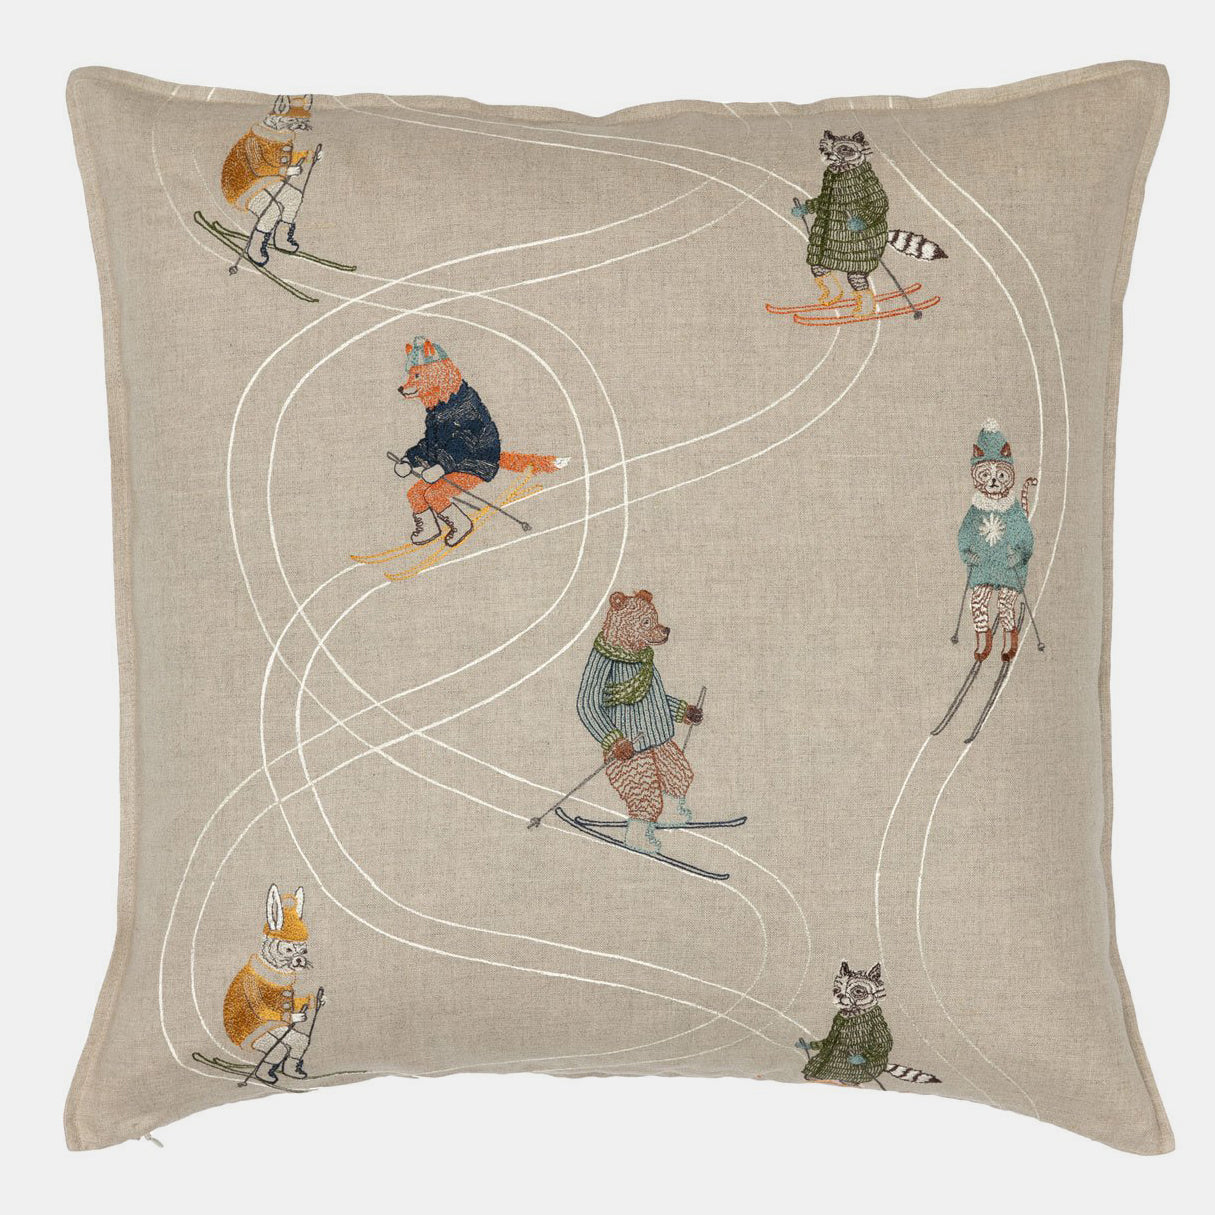 Downhill Skiers Pillow, square